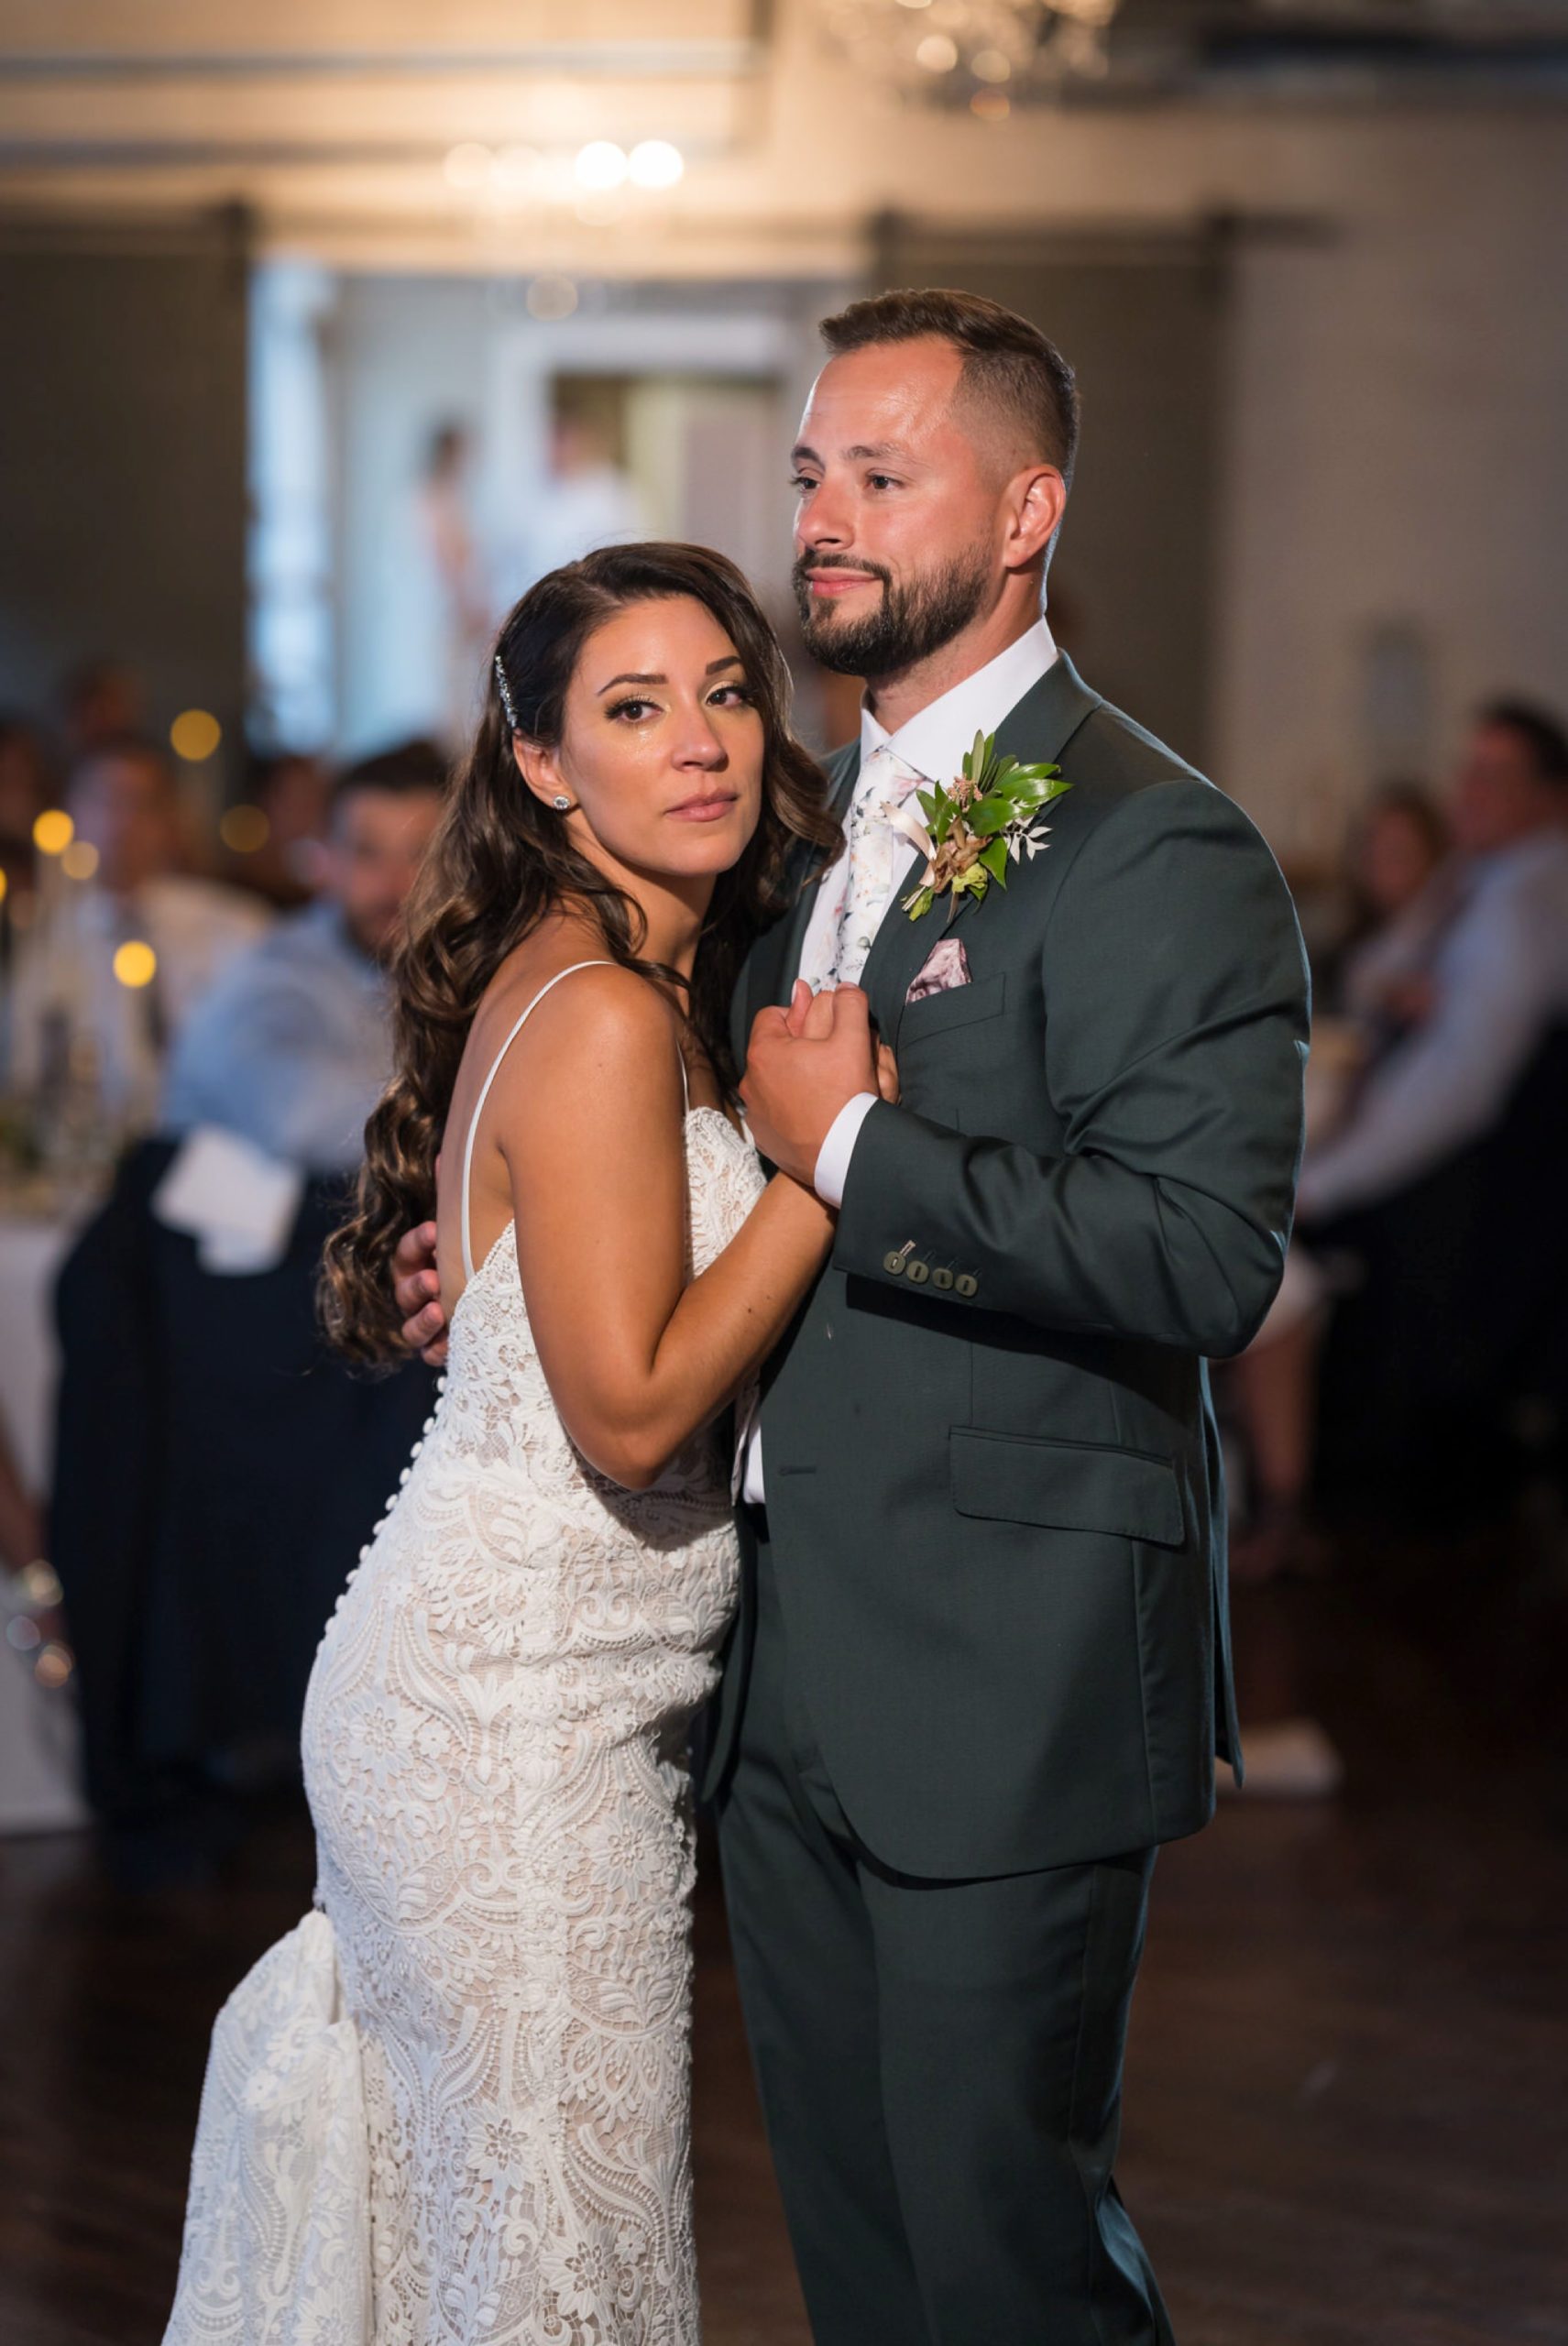 bride and groom share a first dance at their Holly Vault wedding reception